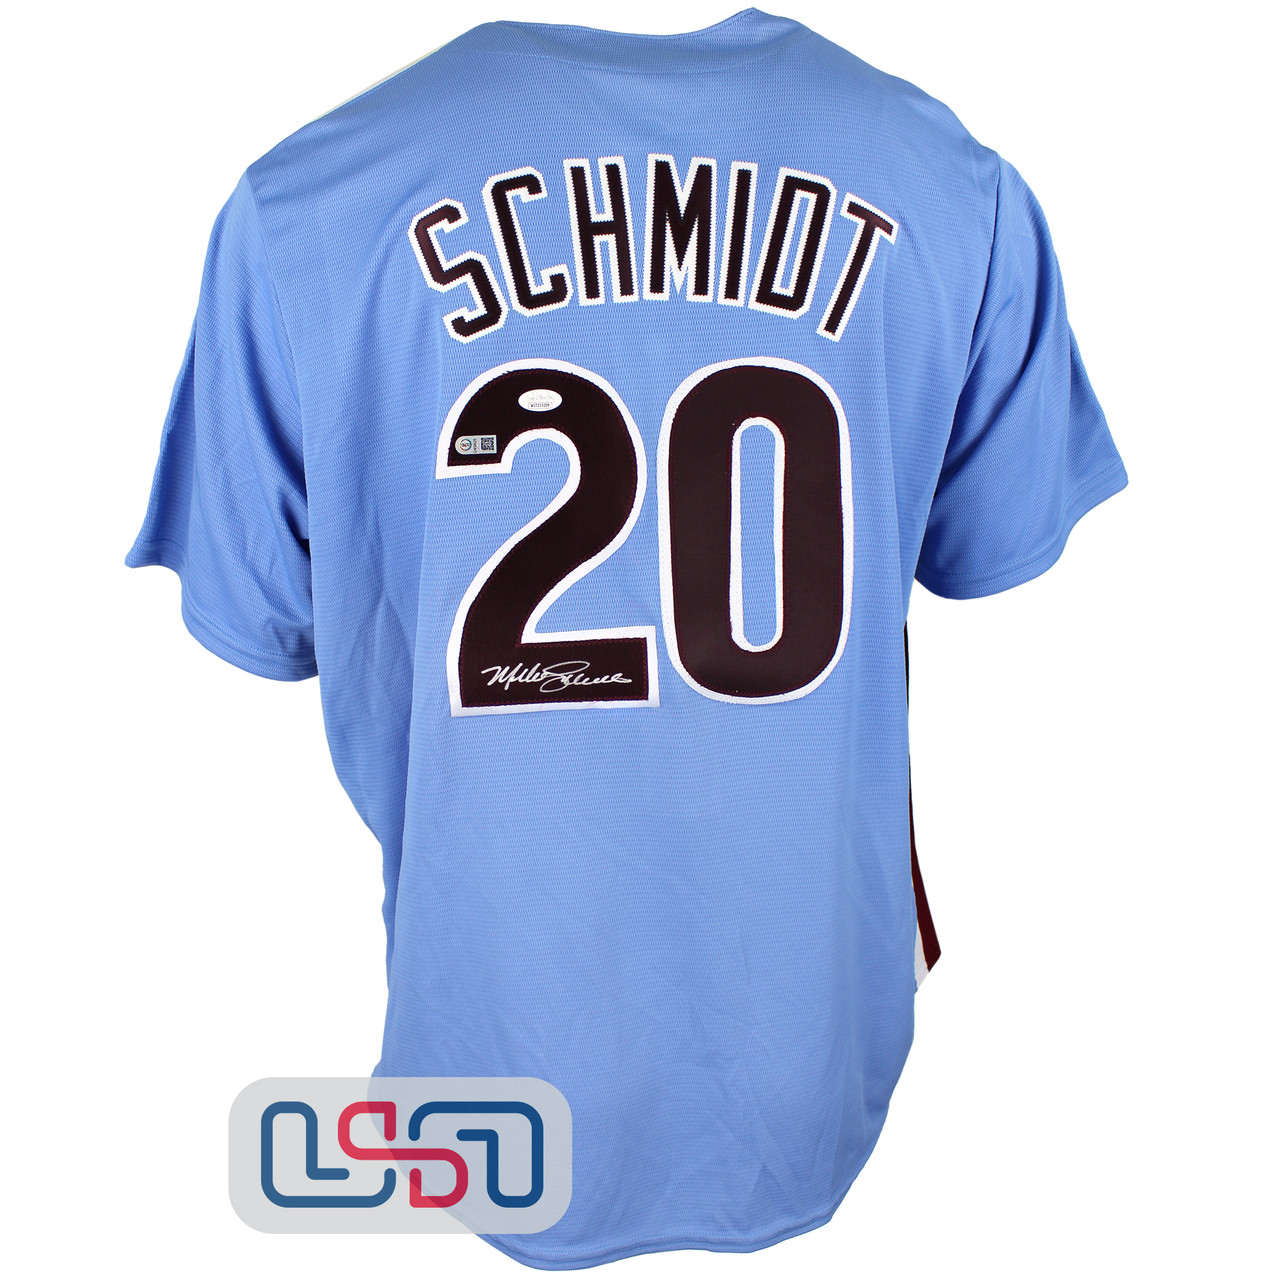 Mike Schmidt Autographed Blue Authentic Phillies Cooperstown Jersey JSA Auth